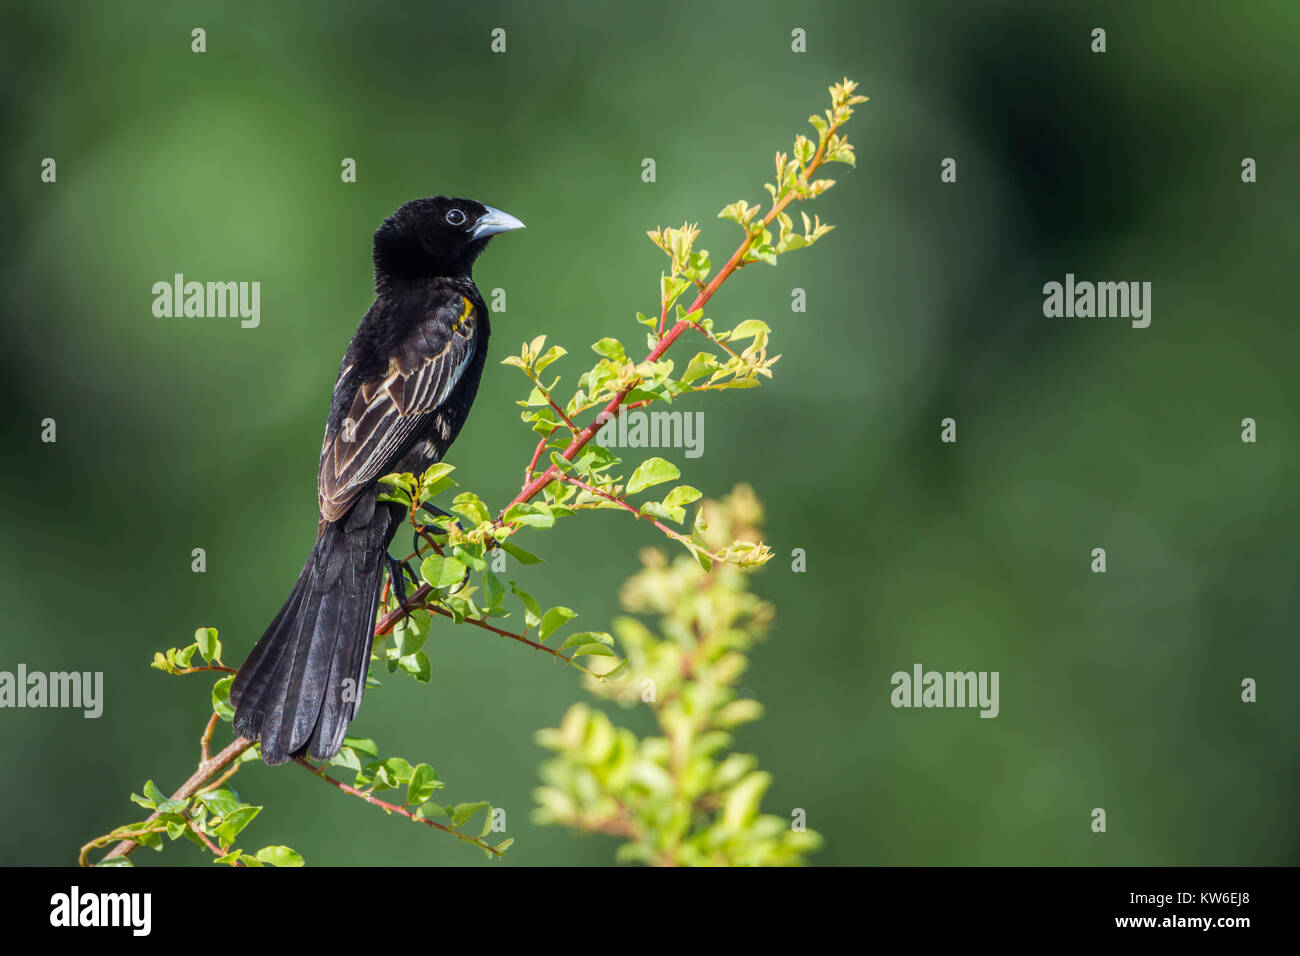 White-winged widowbird in Kruger National park, South Africa ;Specie Euplectes albonotatus family of Ploceidae Stock Photo